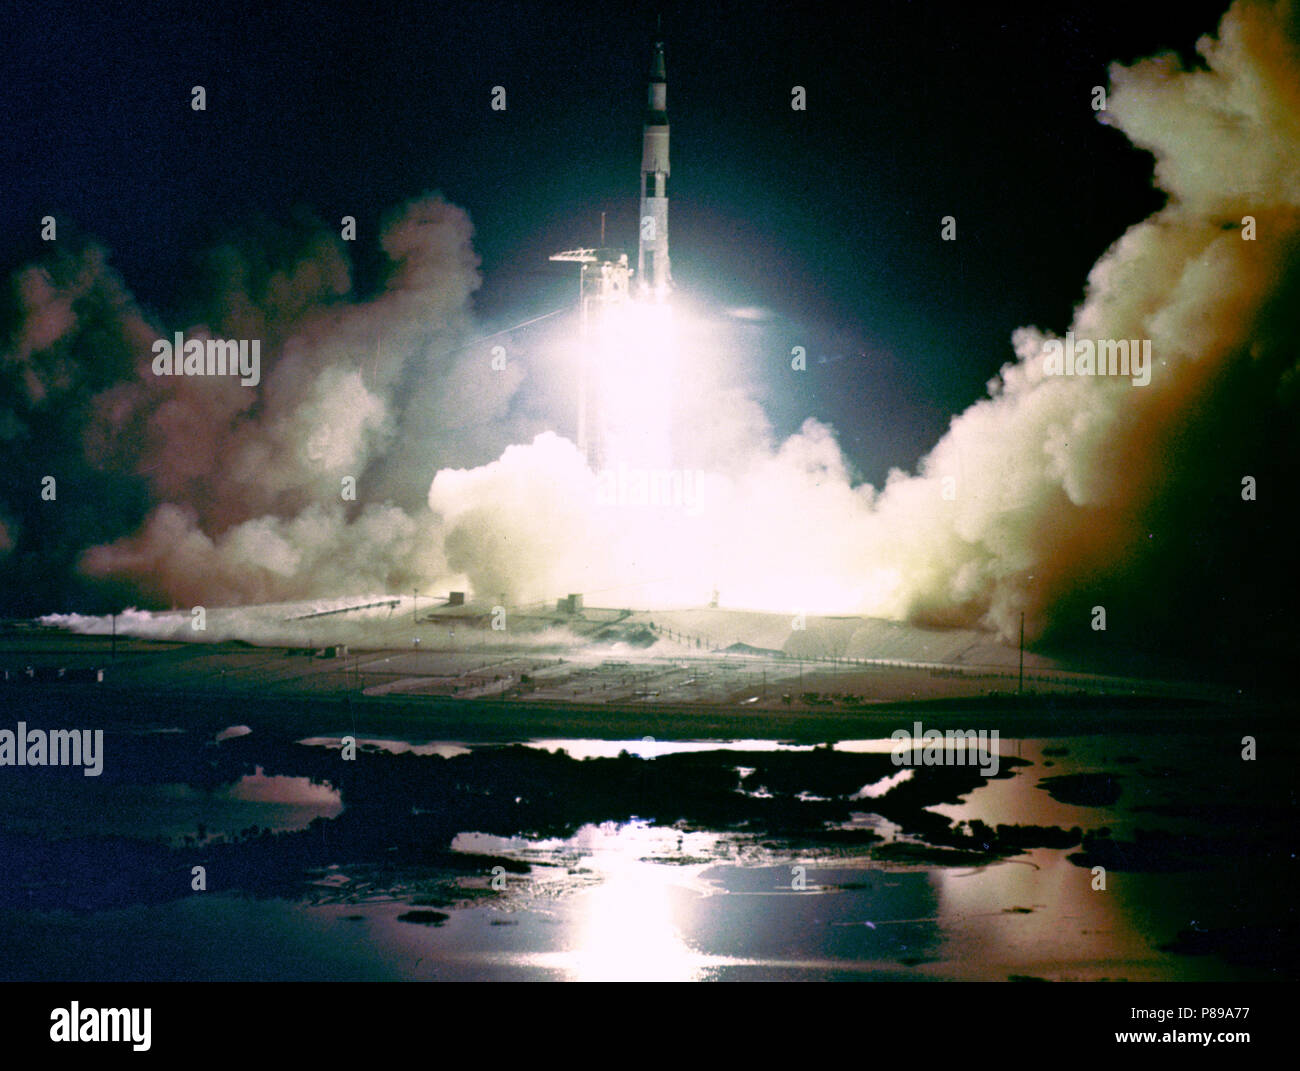 Liftoff of the Apollo 17 Saturn V Moon Rocket from Pad A, Launch Complex 39, Kennedy Space Center, Florida, at 12:33 a.m., December 7, 1972. Apollo 17, the final lunar landing mission, was the first night launch of a Saturn V rocket. Stock Photo